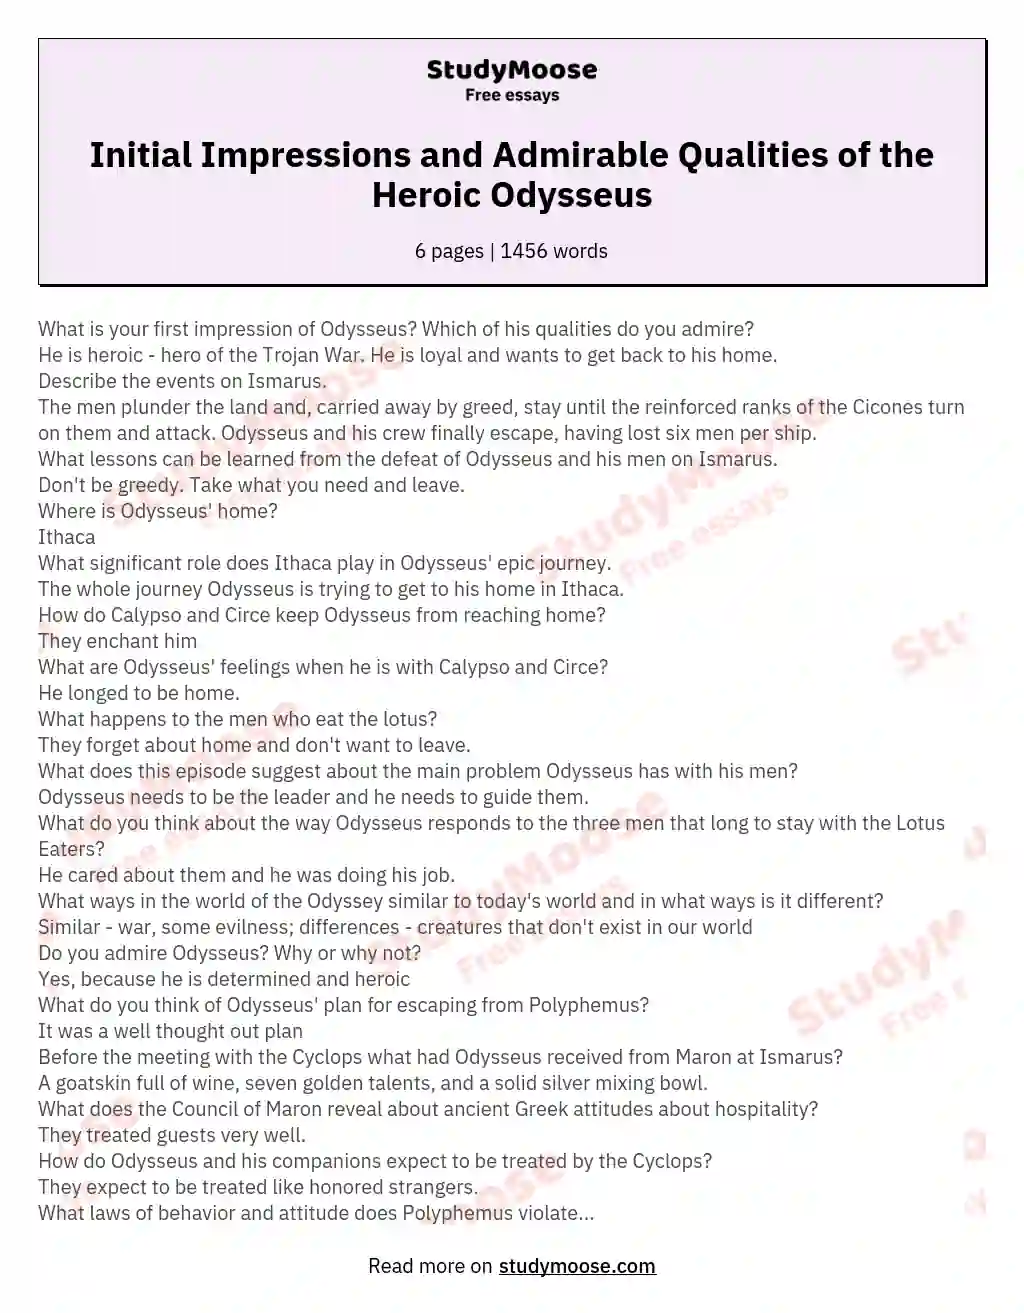 Initial Impressions and Admirable Qualities of the Heroic Odysseus essay